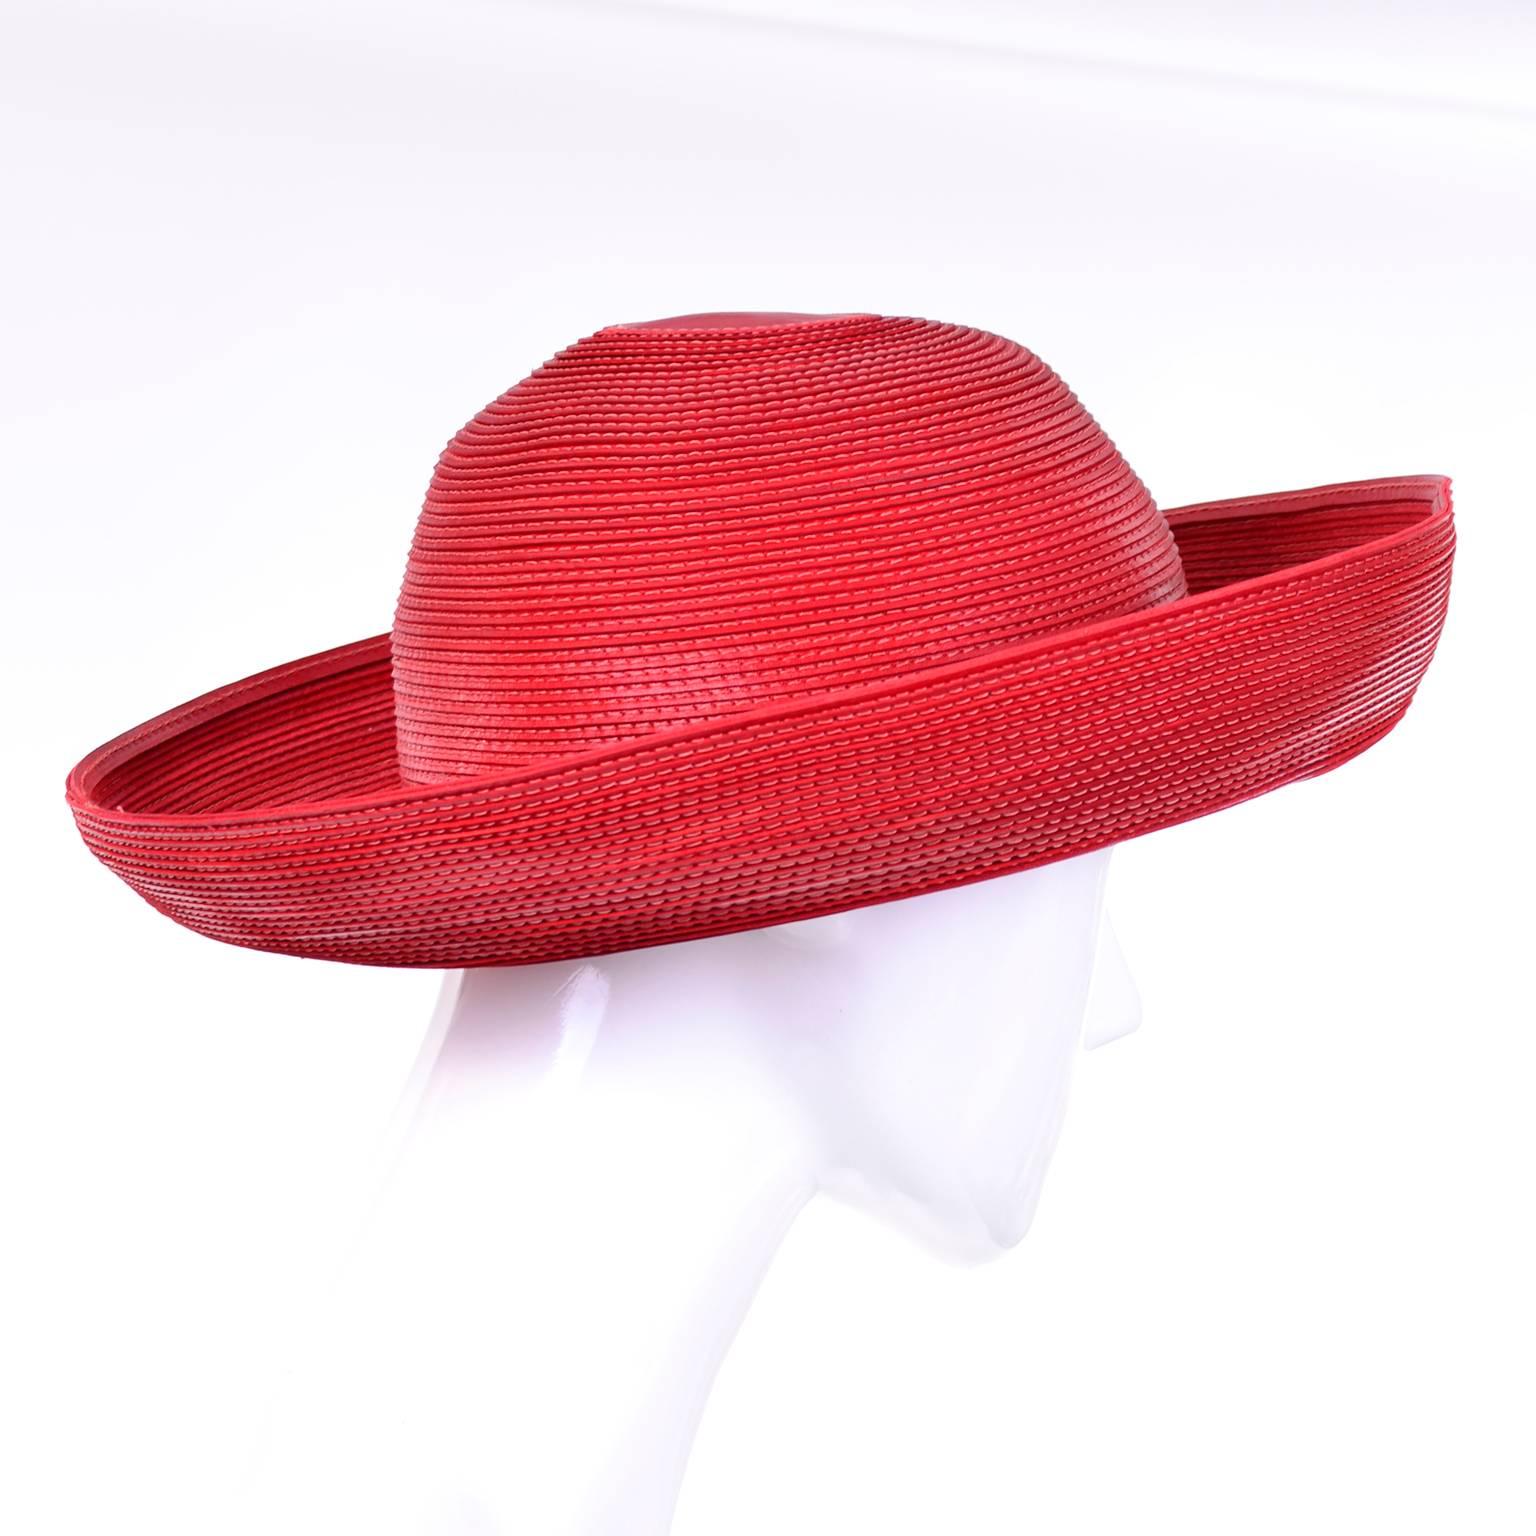 red leather bucket hat